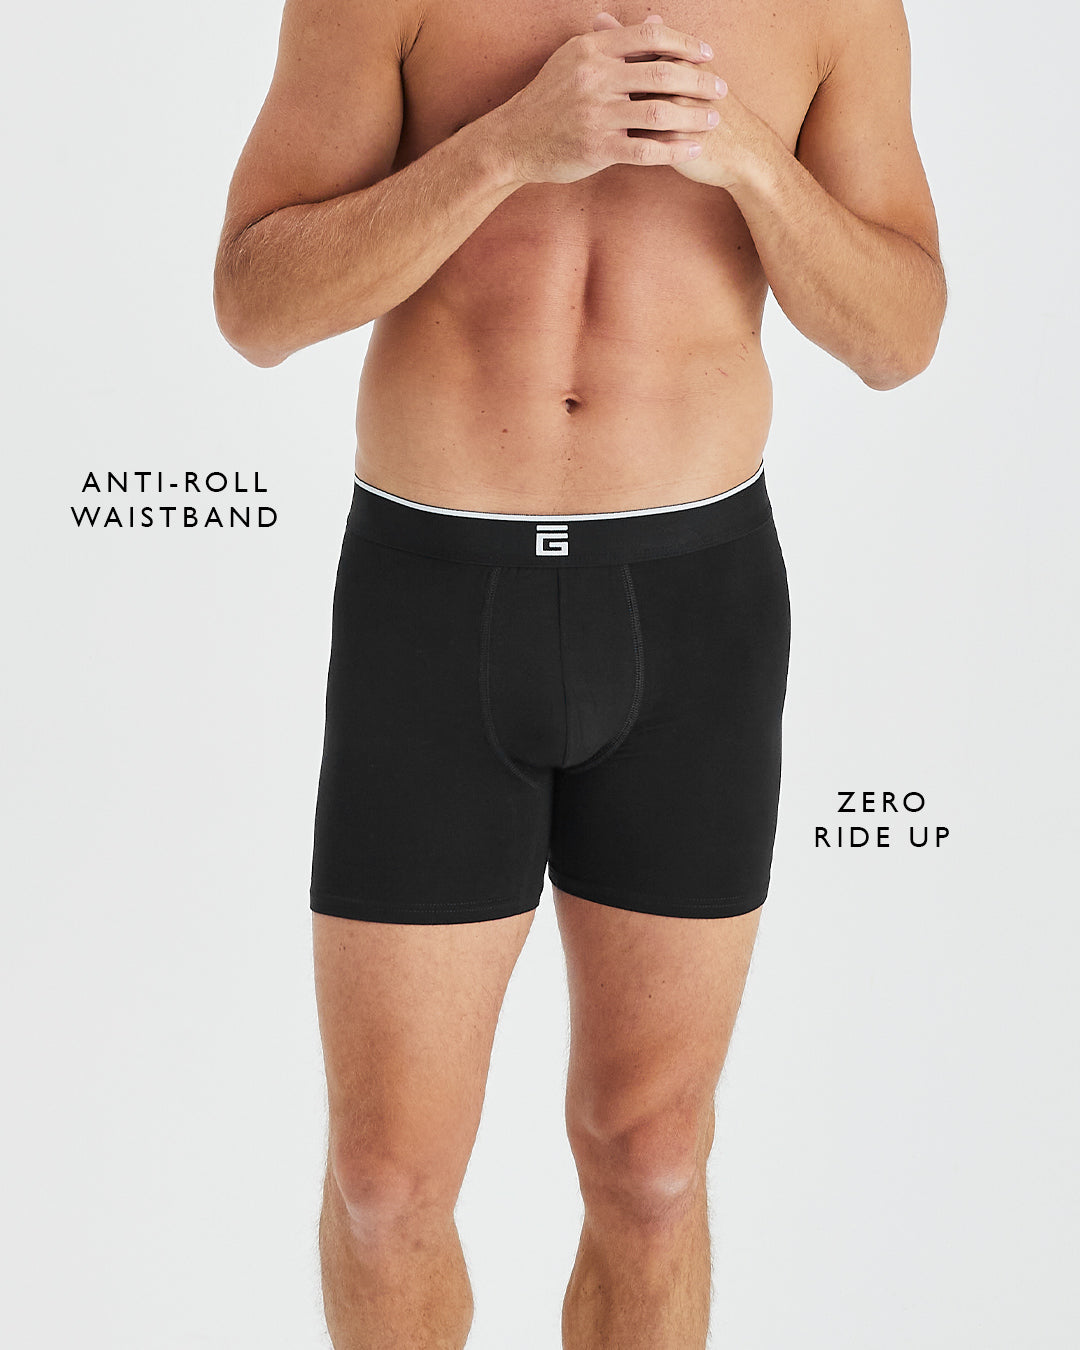 The Bamboo Boxer (3 Pack)